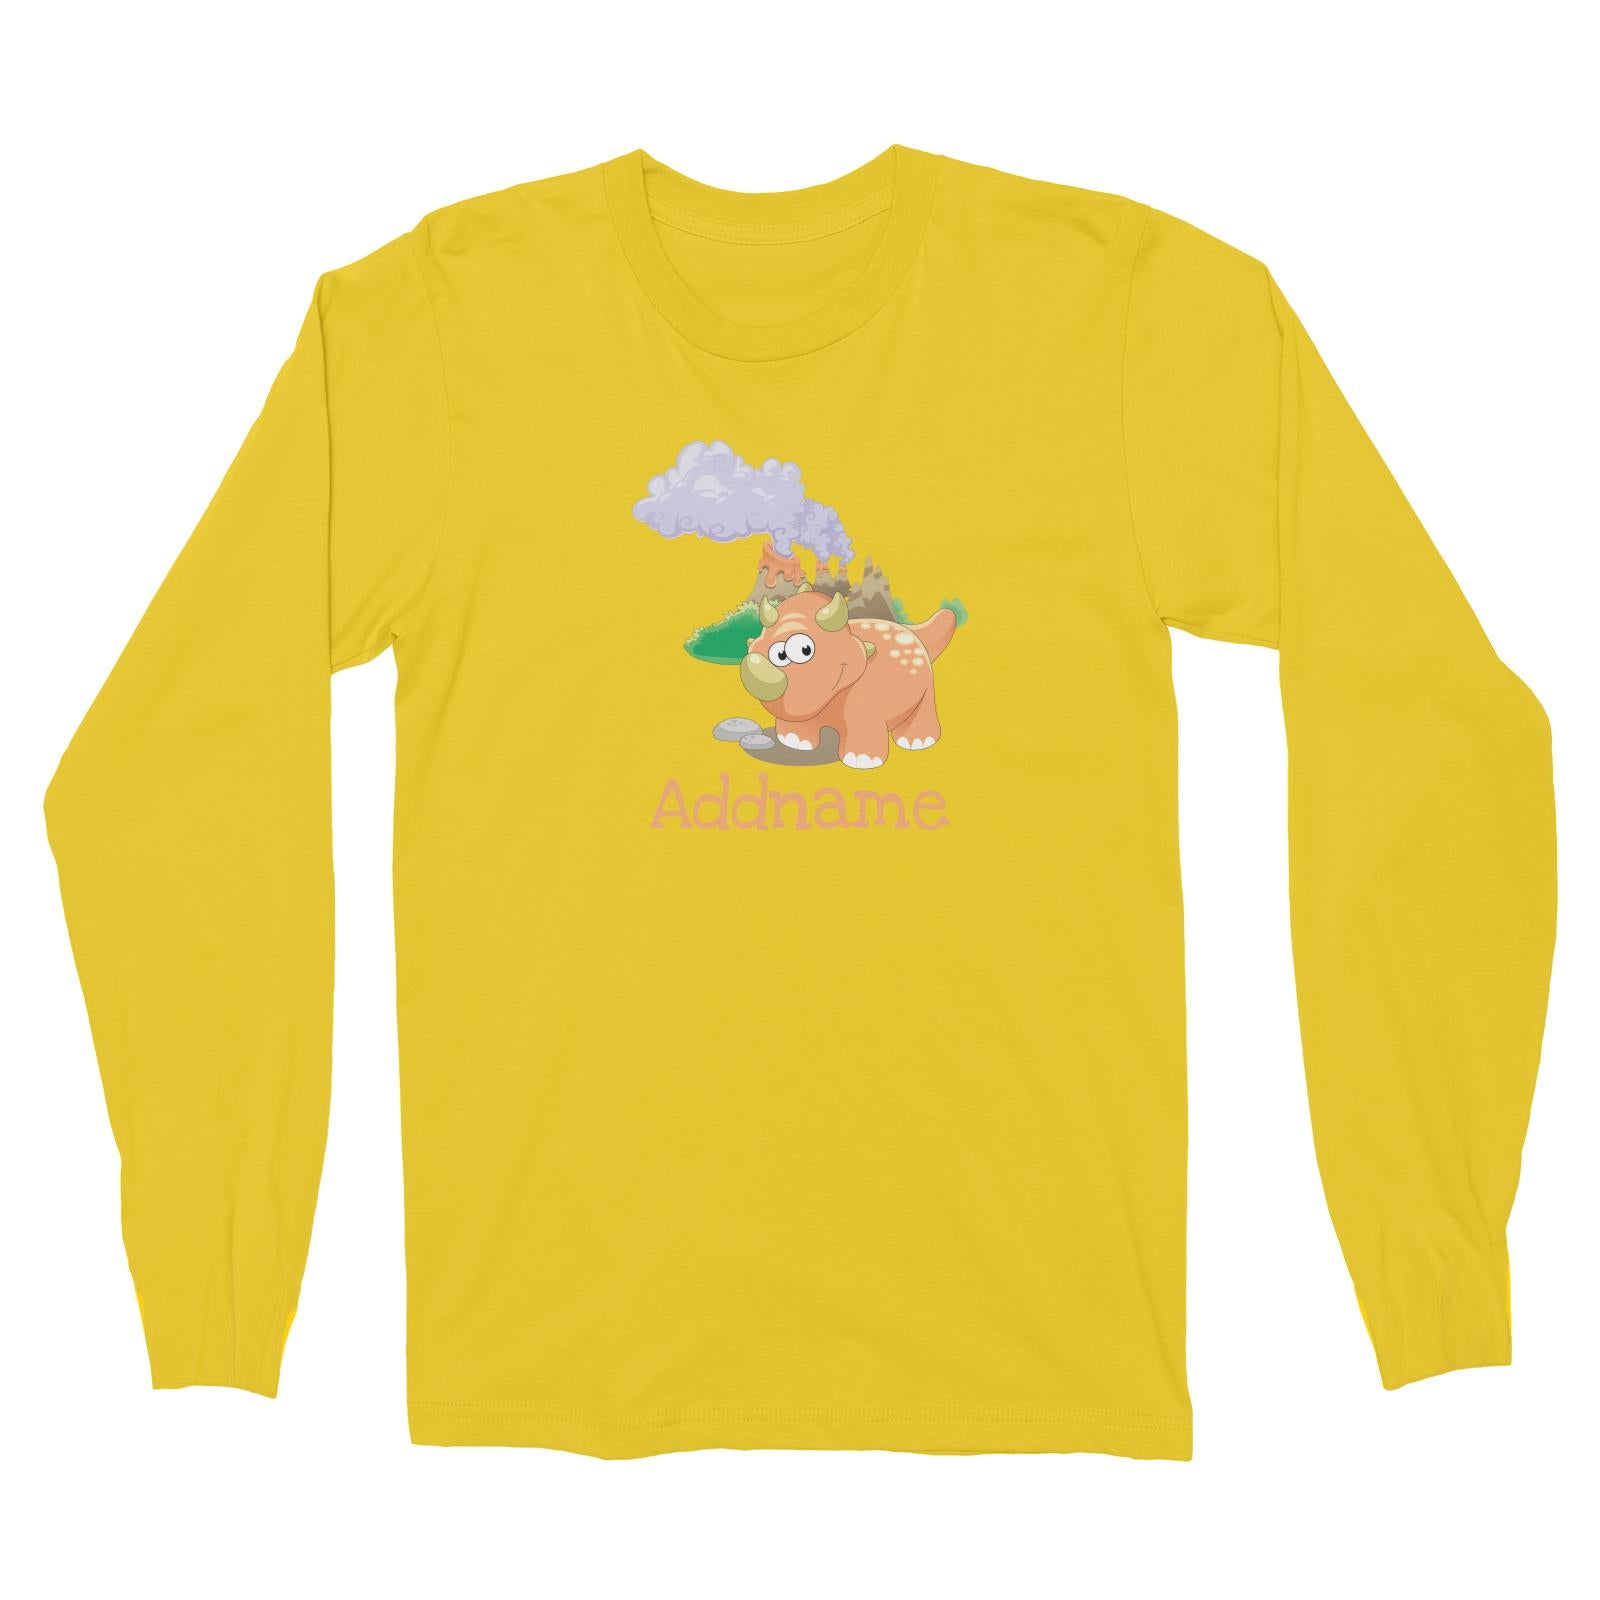 Dinosaurs Triceratop Addname Long Sleeve Unisex T-Shirt